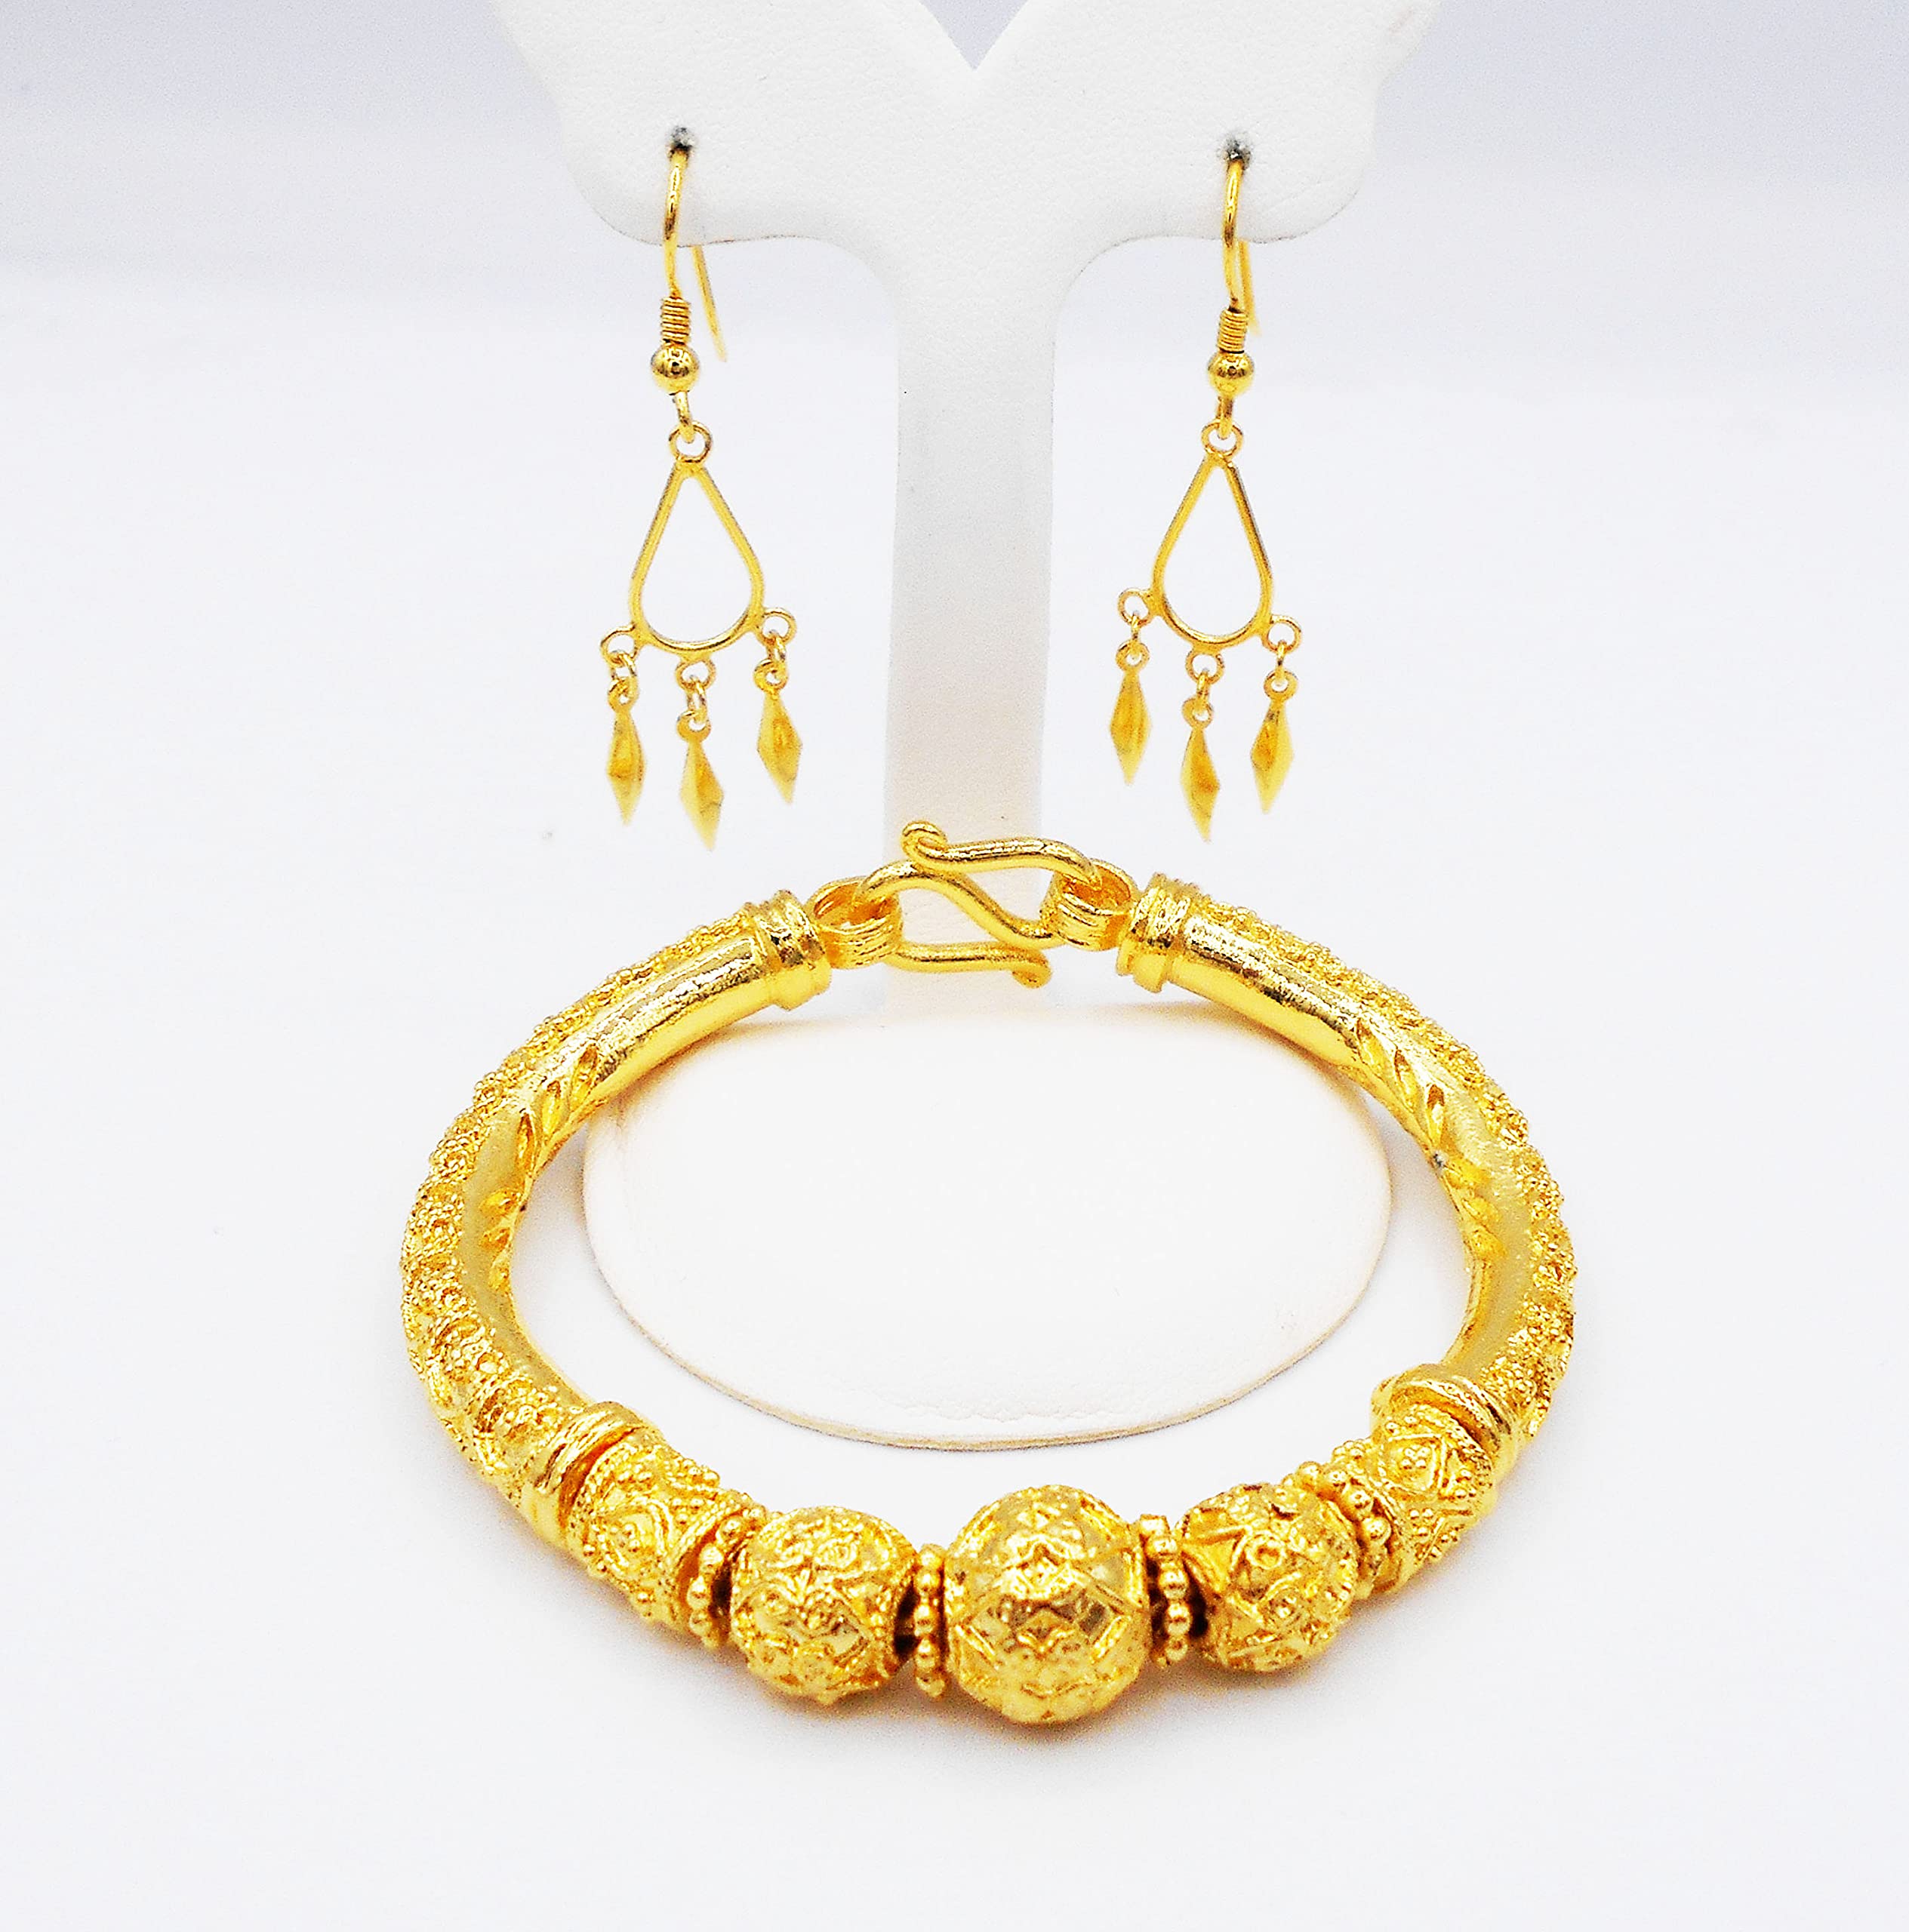 Lai Thai Gold Plated Bangle 24k Thai Baht Yellow Gold Filled Bracelet Size 6.5 Inch and Earrings 1 Pair